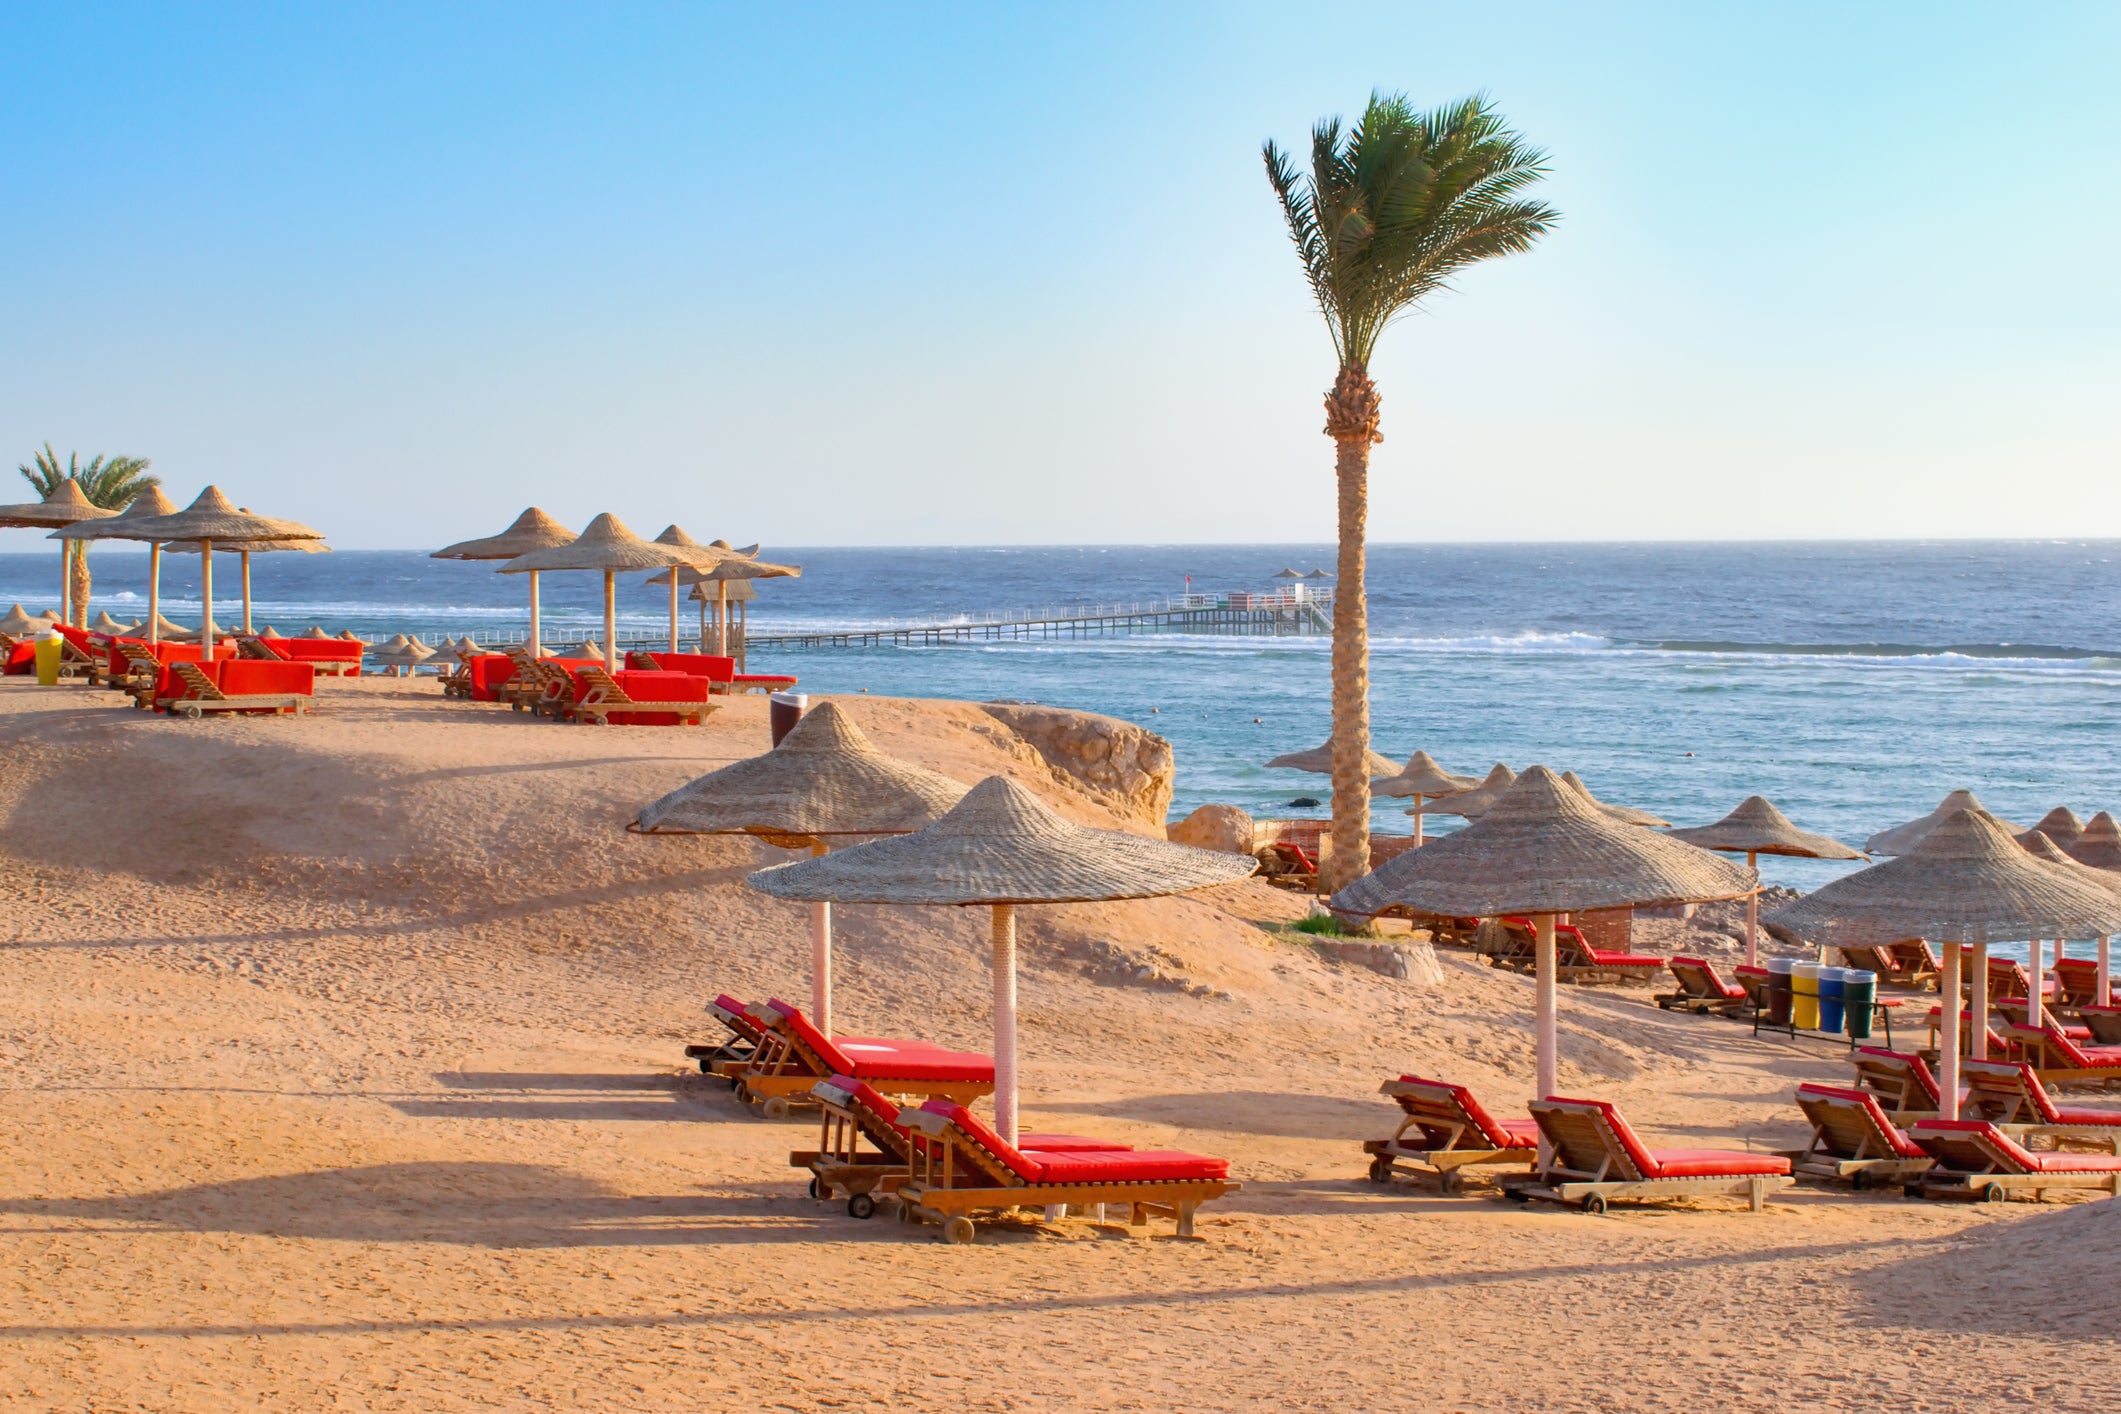 Find scorching summers and sea turtles at the southeast Egyptian resort